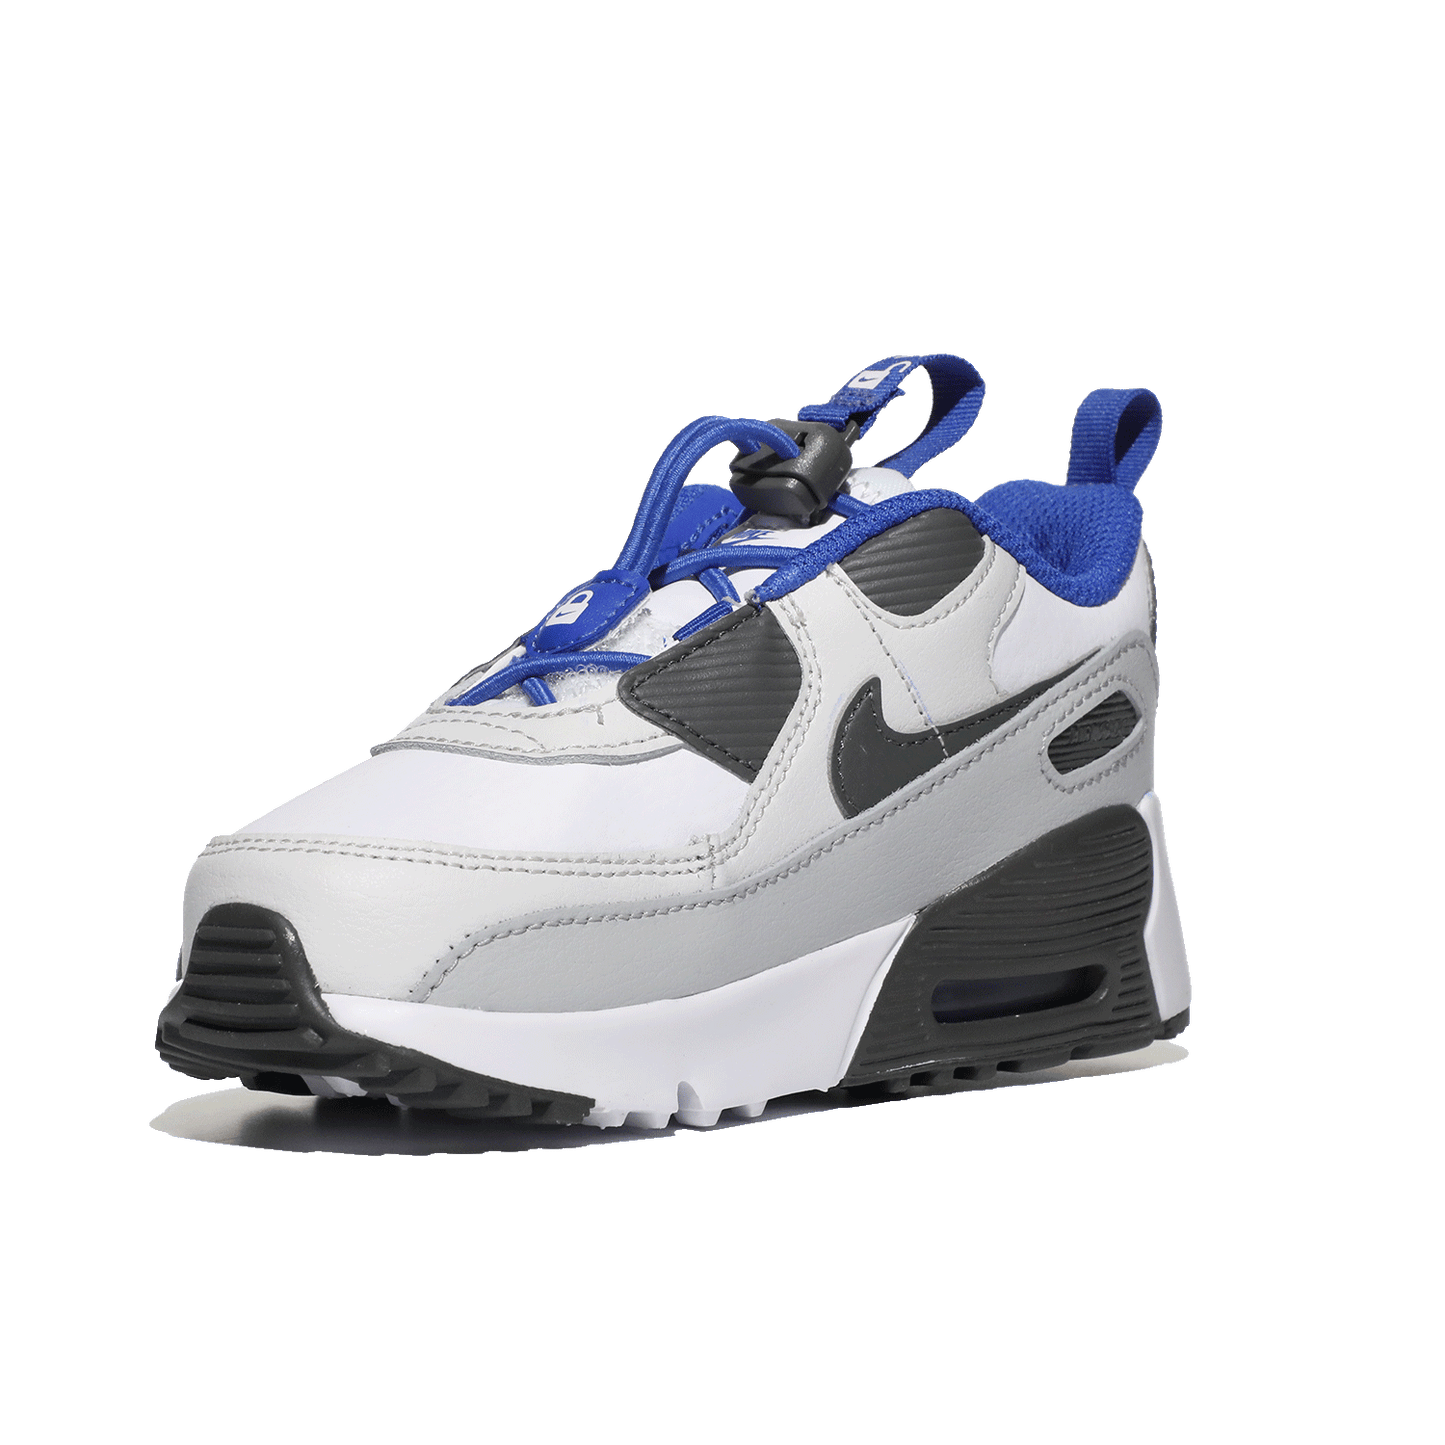 Image 5 of Air Max 90 Toggle (Infant/Toddler)